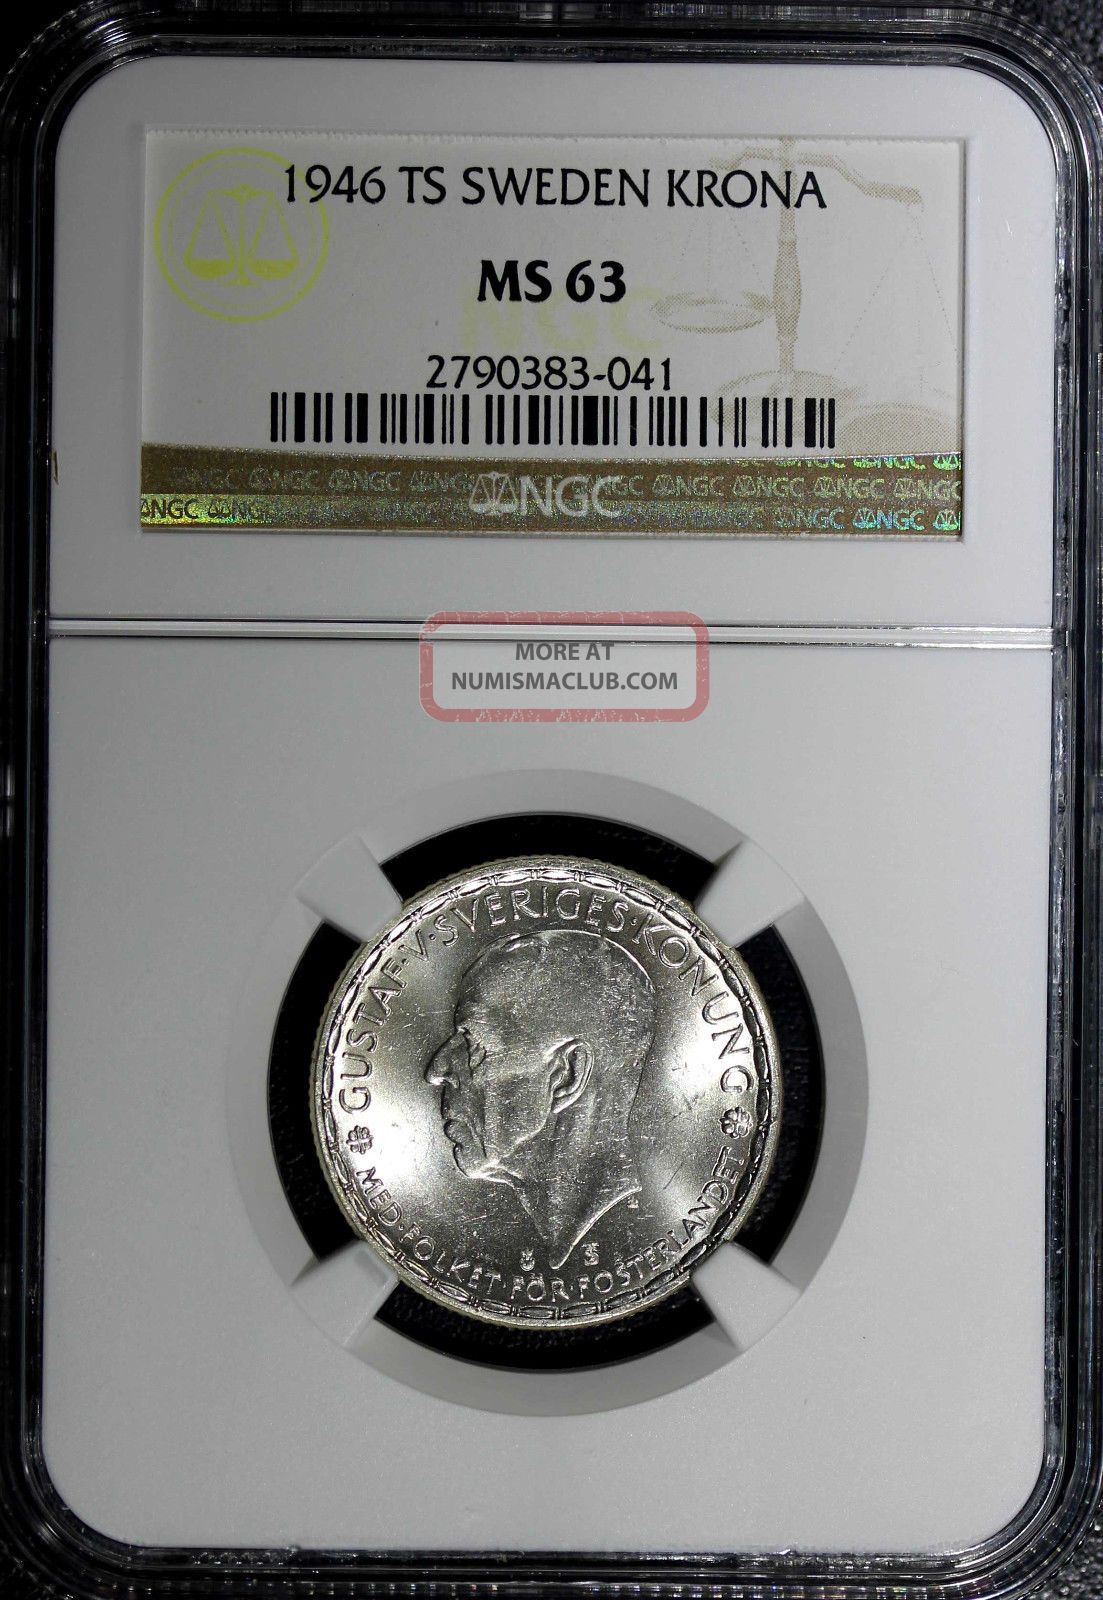 Sweden Silver Gustaf V 1946 Ts Krona Ngc Ms63 Km 814 Top Graded By Ngc